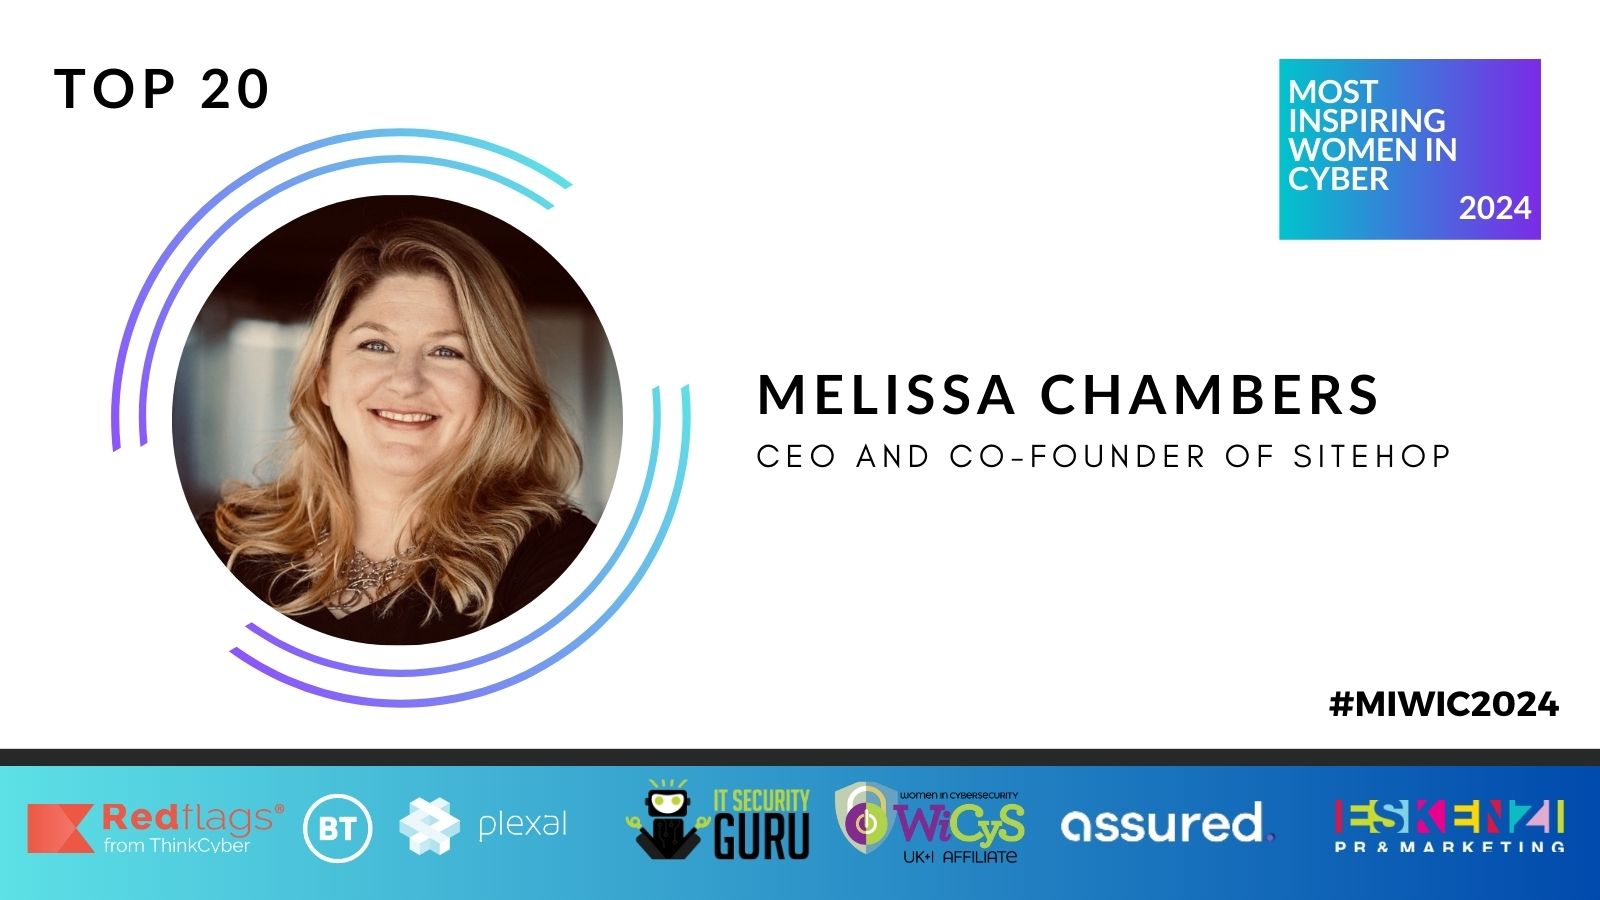 #MIWIC2024: Melissa Chambers, CEO and Co-Founder of Sitehop